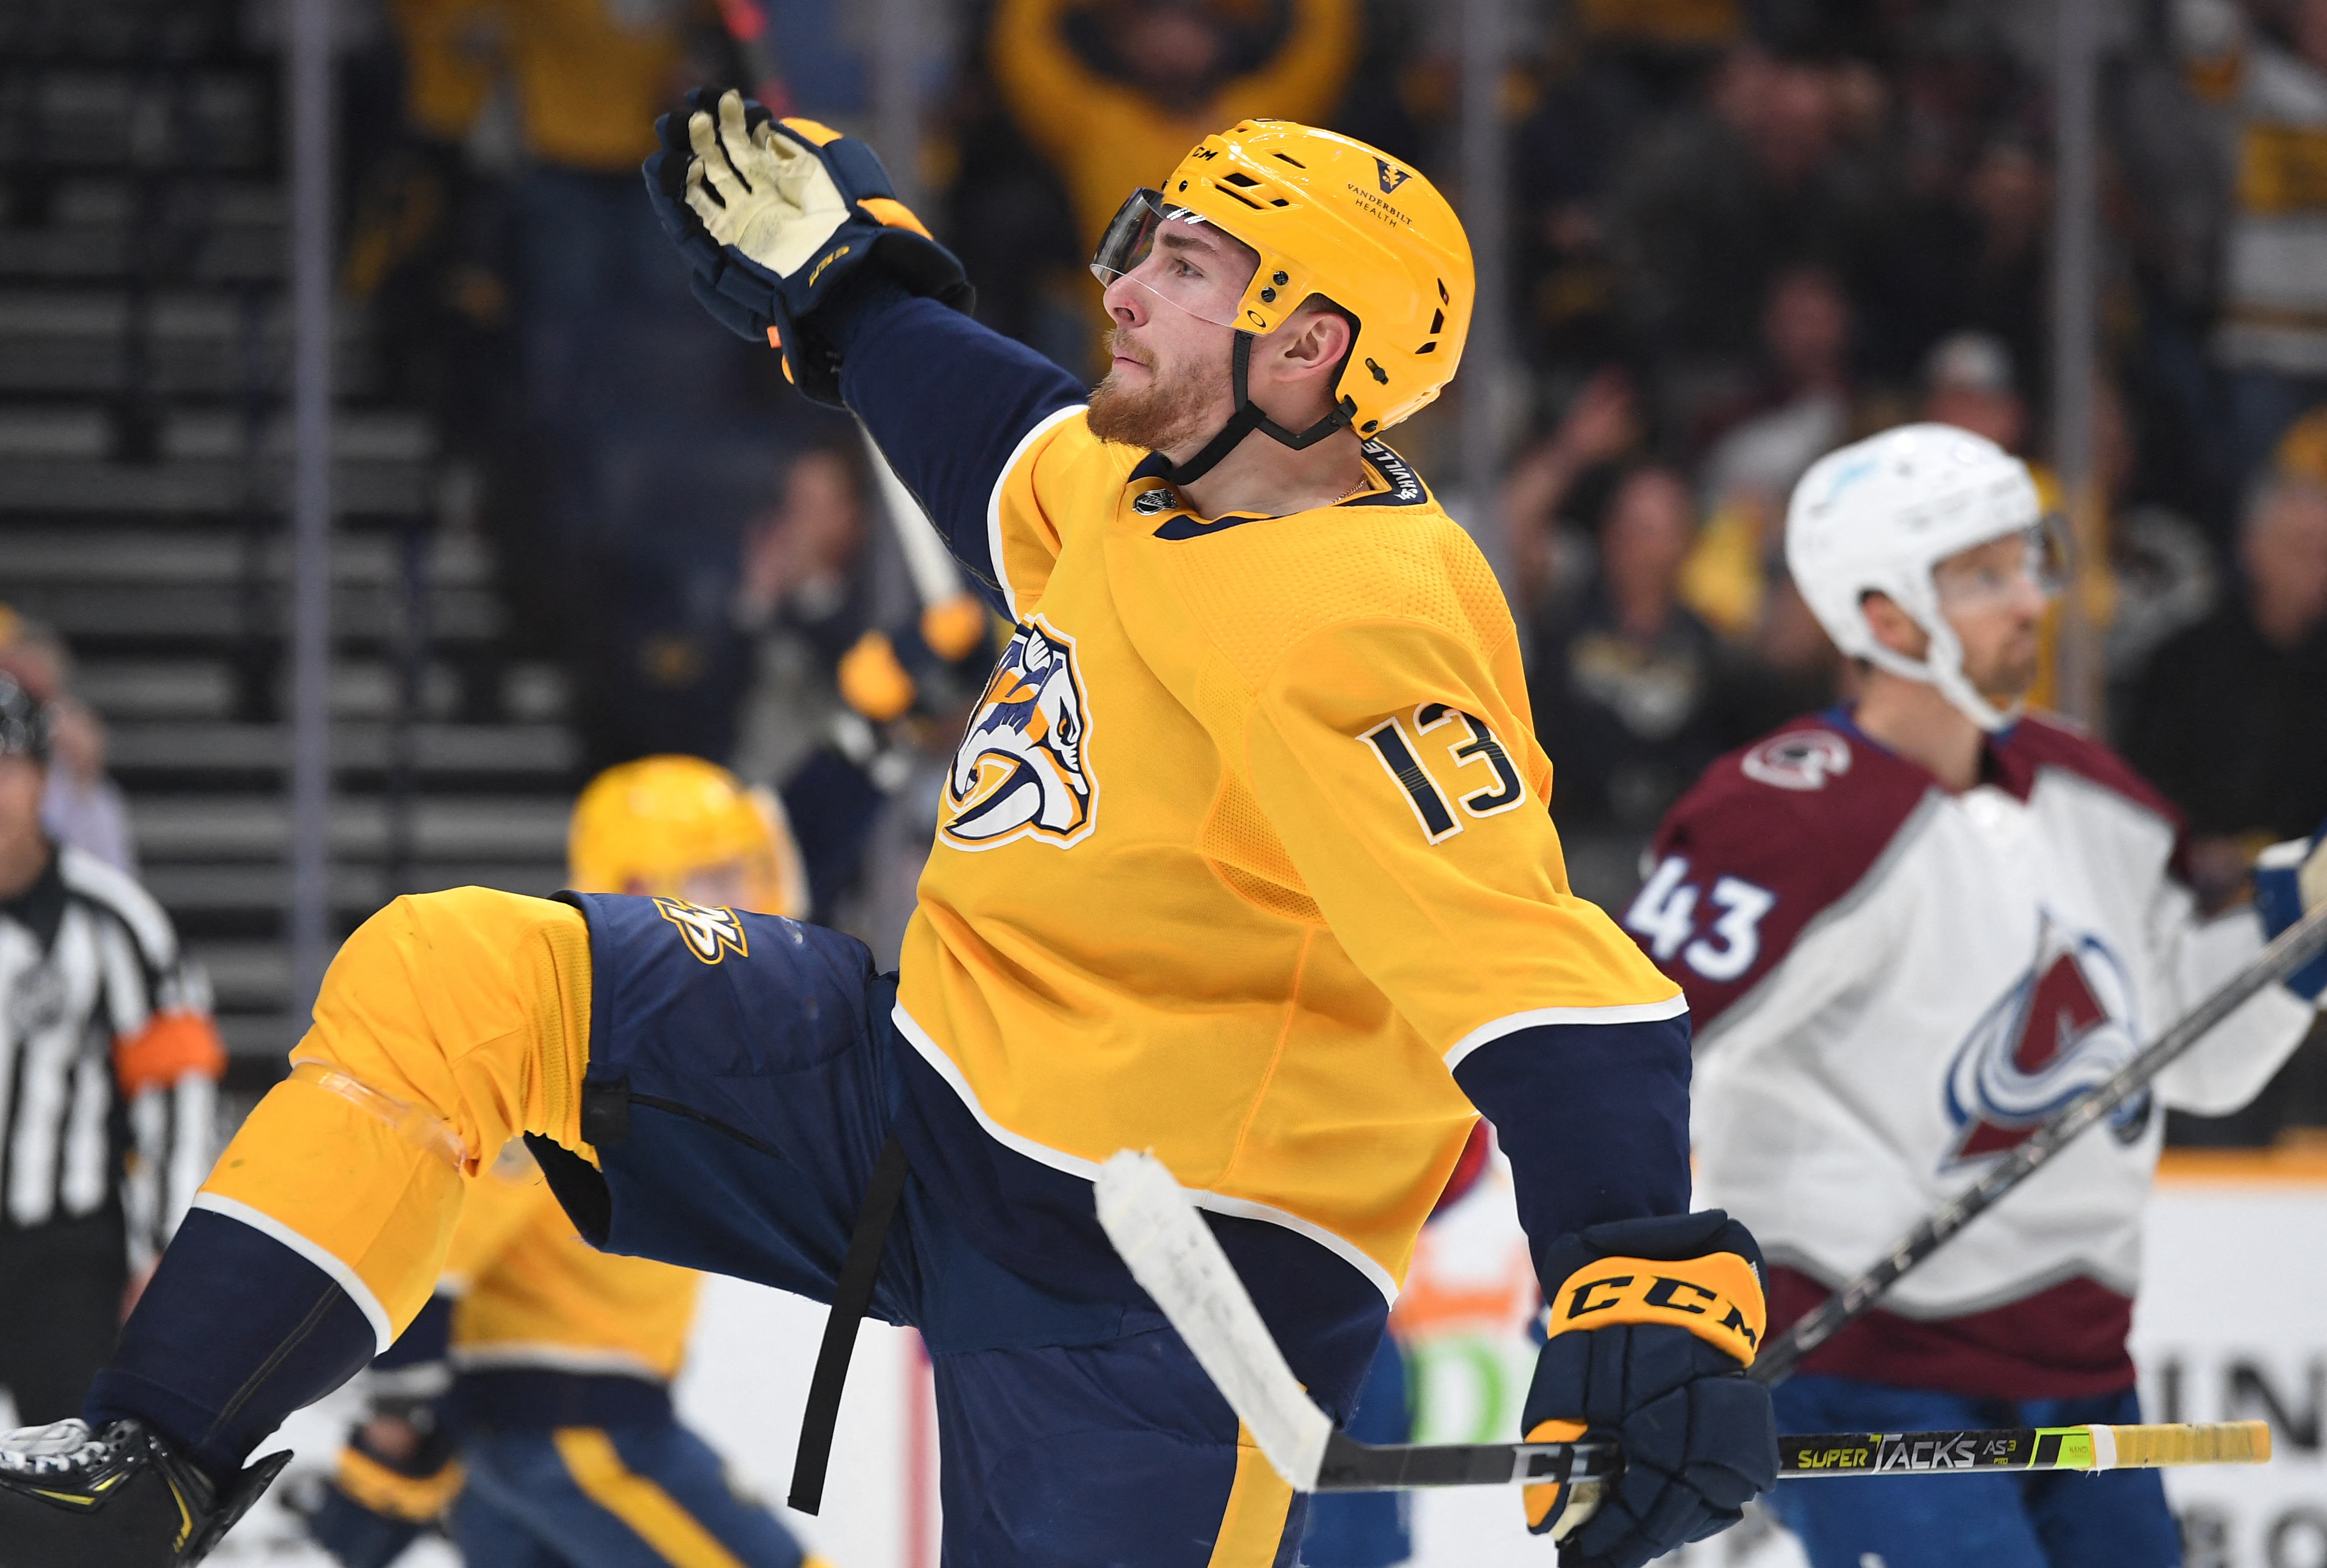 May 9, 2022; Nashville, Tennessee, USA; Nashville Predators center Yakov Trenin (13) celebrates after a goal during the first period against the Colorado Avalanche in game four of the first round of the 2022 Stanley Cup Playoffs at Bridgestone Arena. Mandatory Credit: Christopher Hanewinckel-USA TODAY Sports